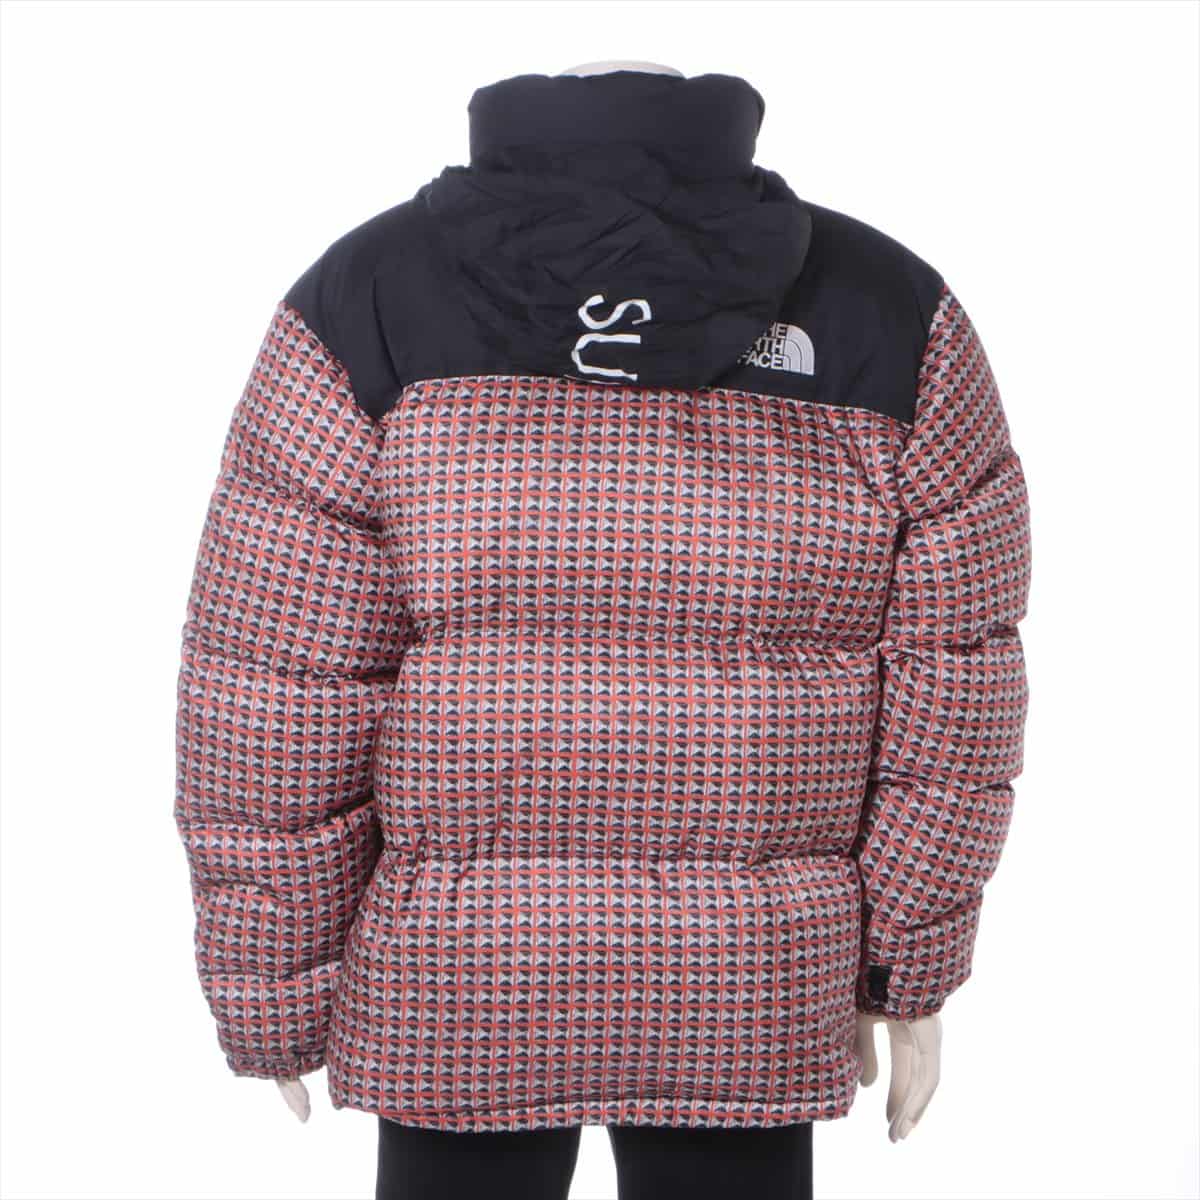 SUPREME × THE NORTH FACE 21SS Nylon Down jacket XL Men's Red  ND42100I Nupsi studded pattern